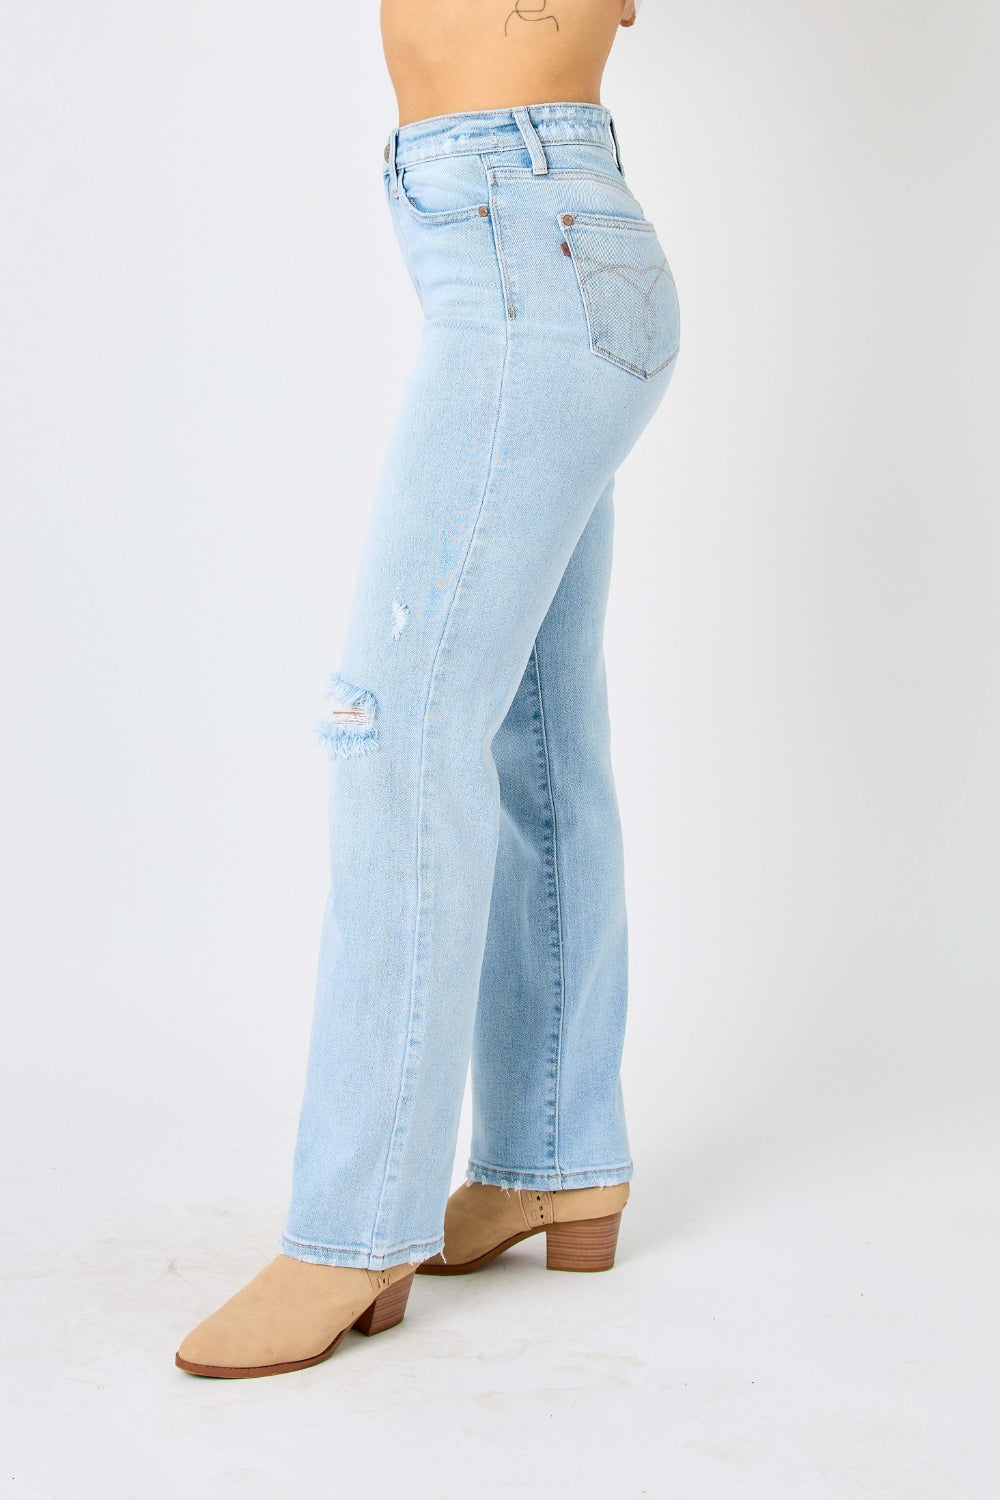 Callie - High Waist Distressed Straight Jeans - Judy Blue - Exclusively Online